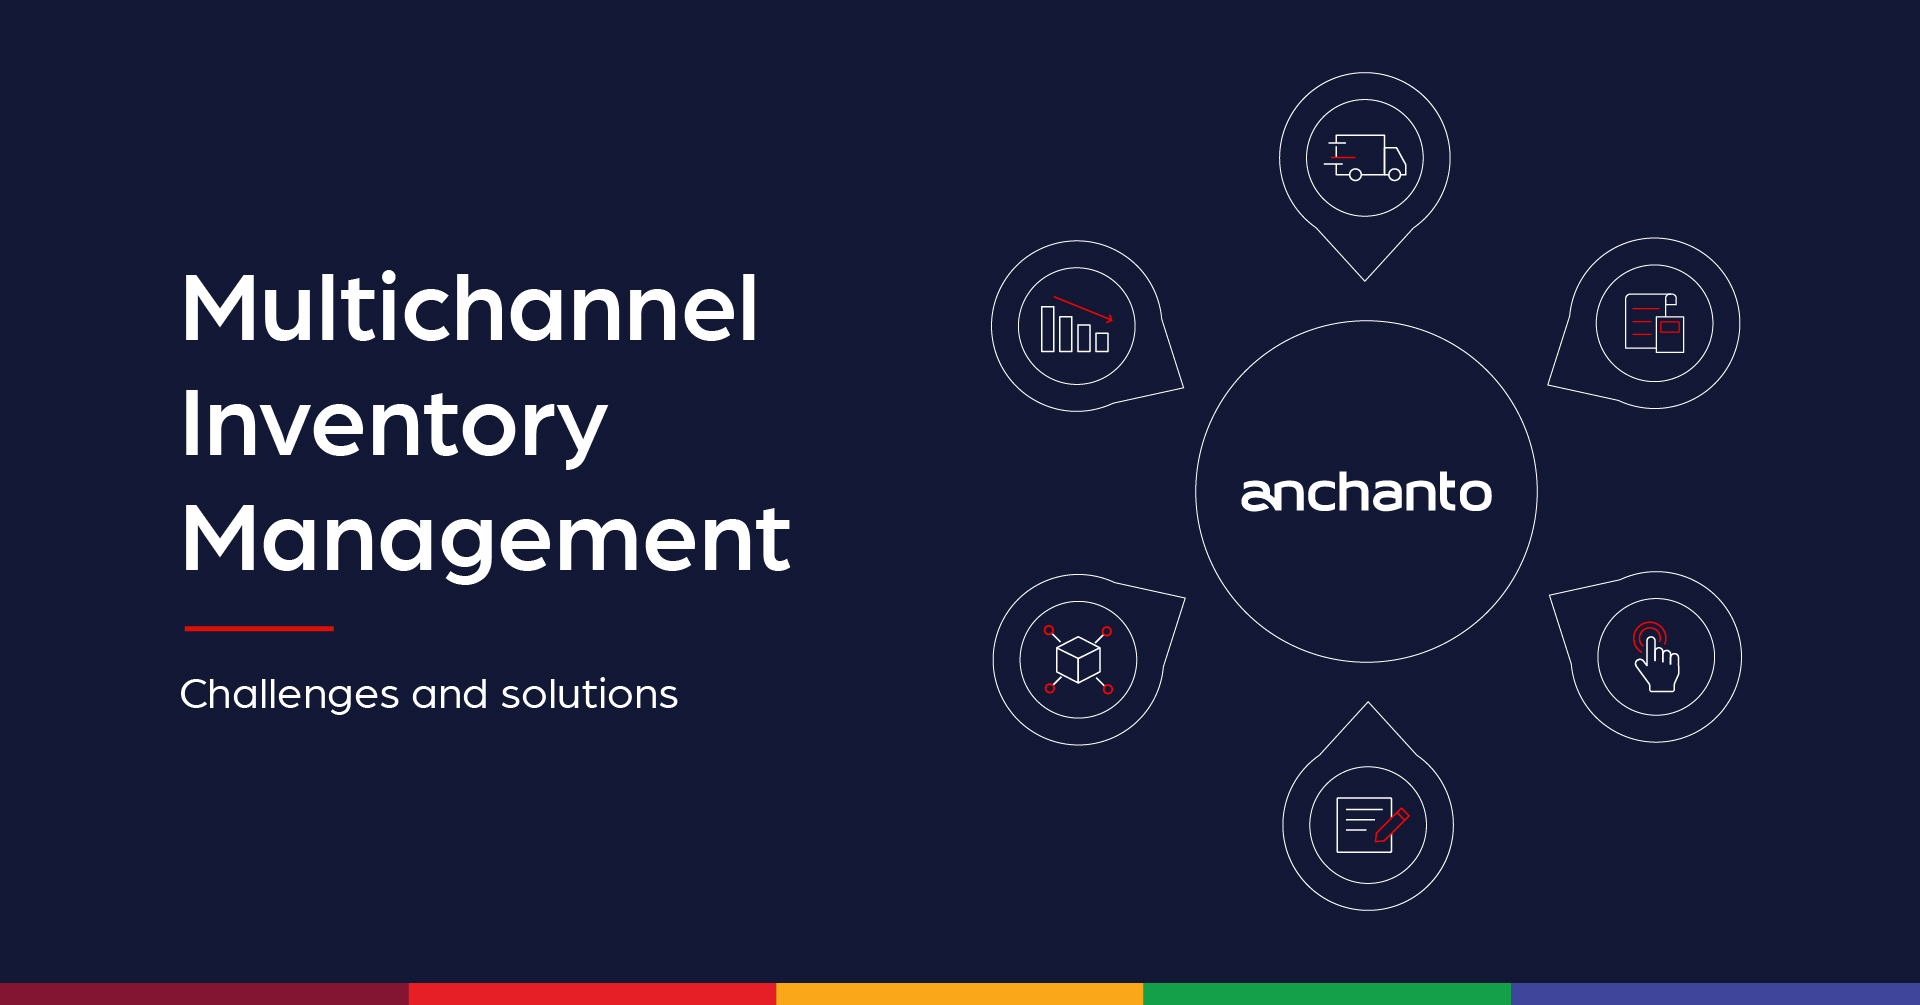 Top Multichannel Inventory Challenges and Solutions